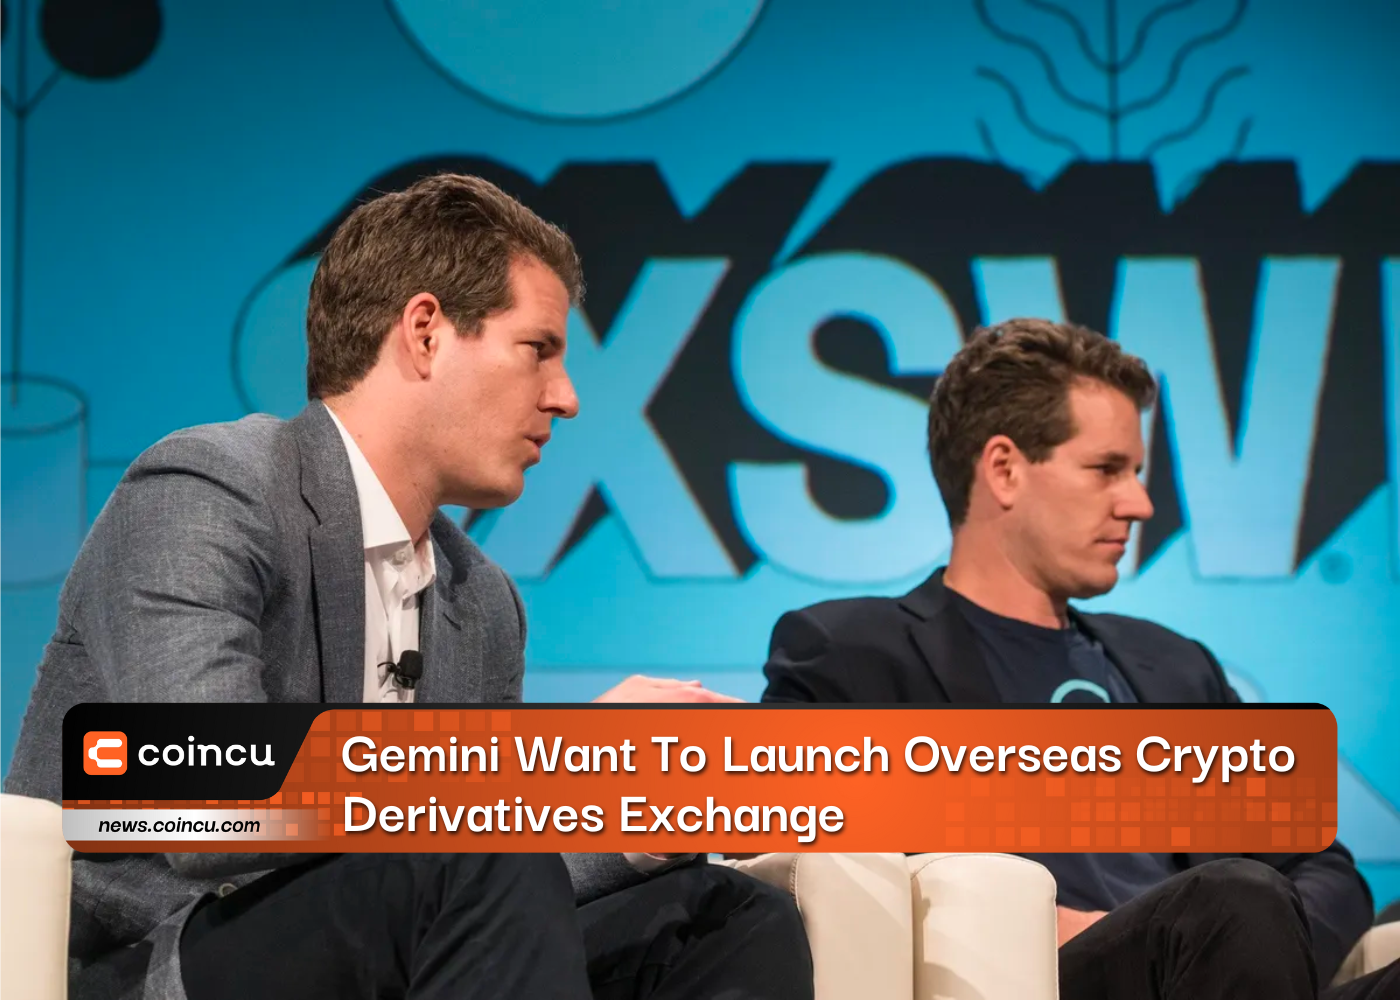 Gemini Want To Launch Overseas Crypto Derivatives Exchange